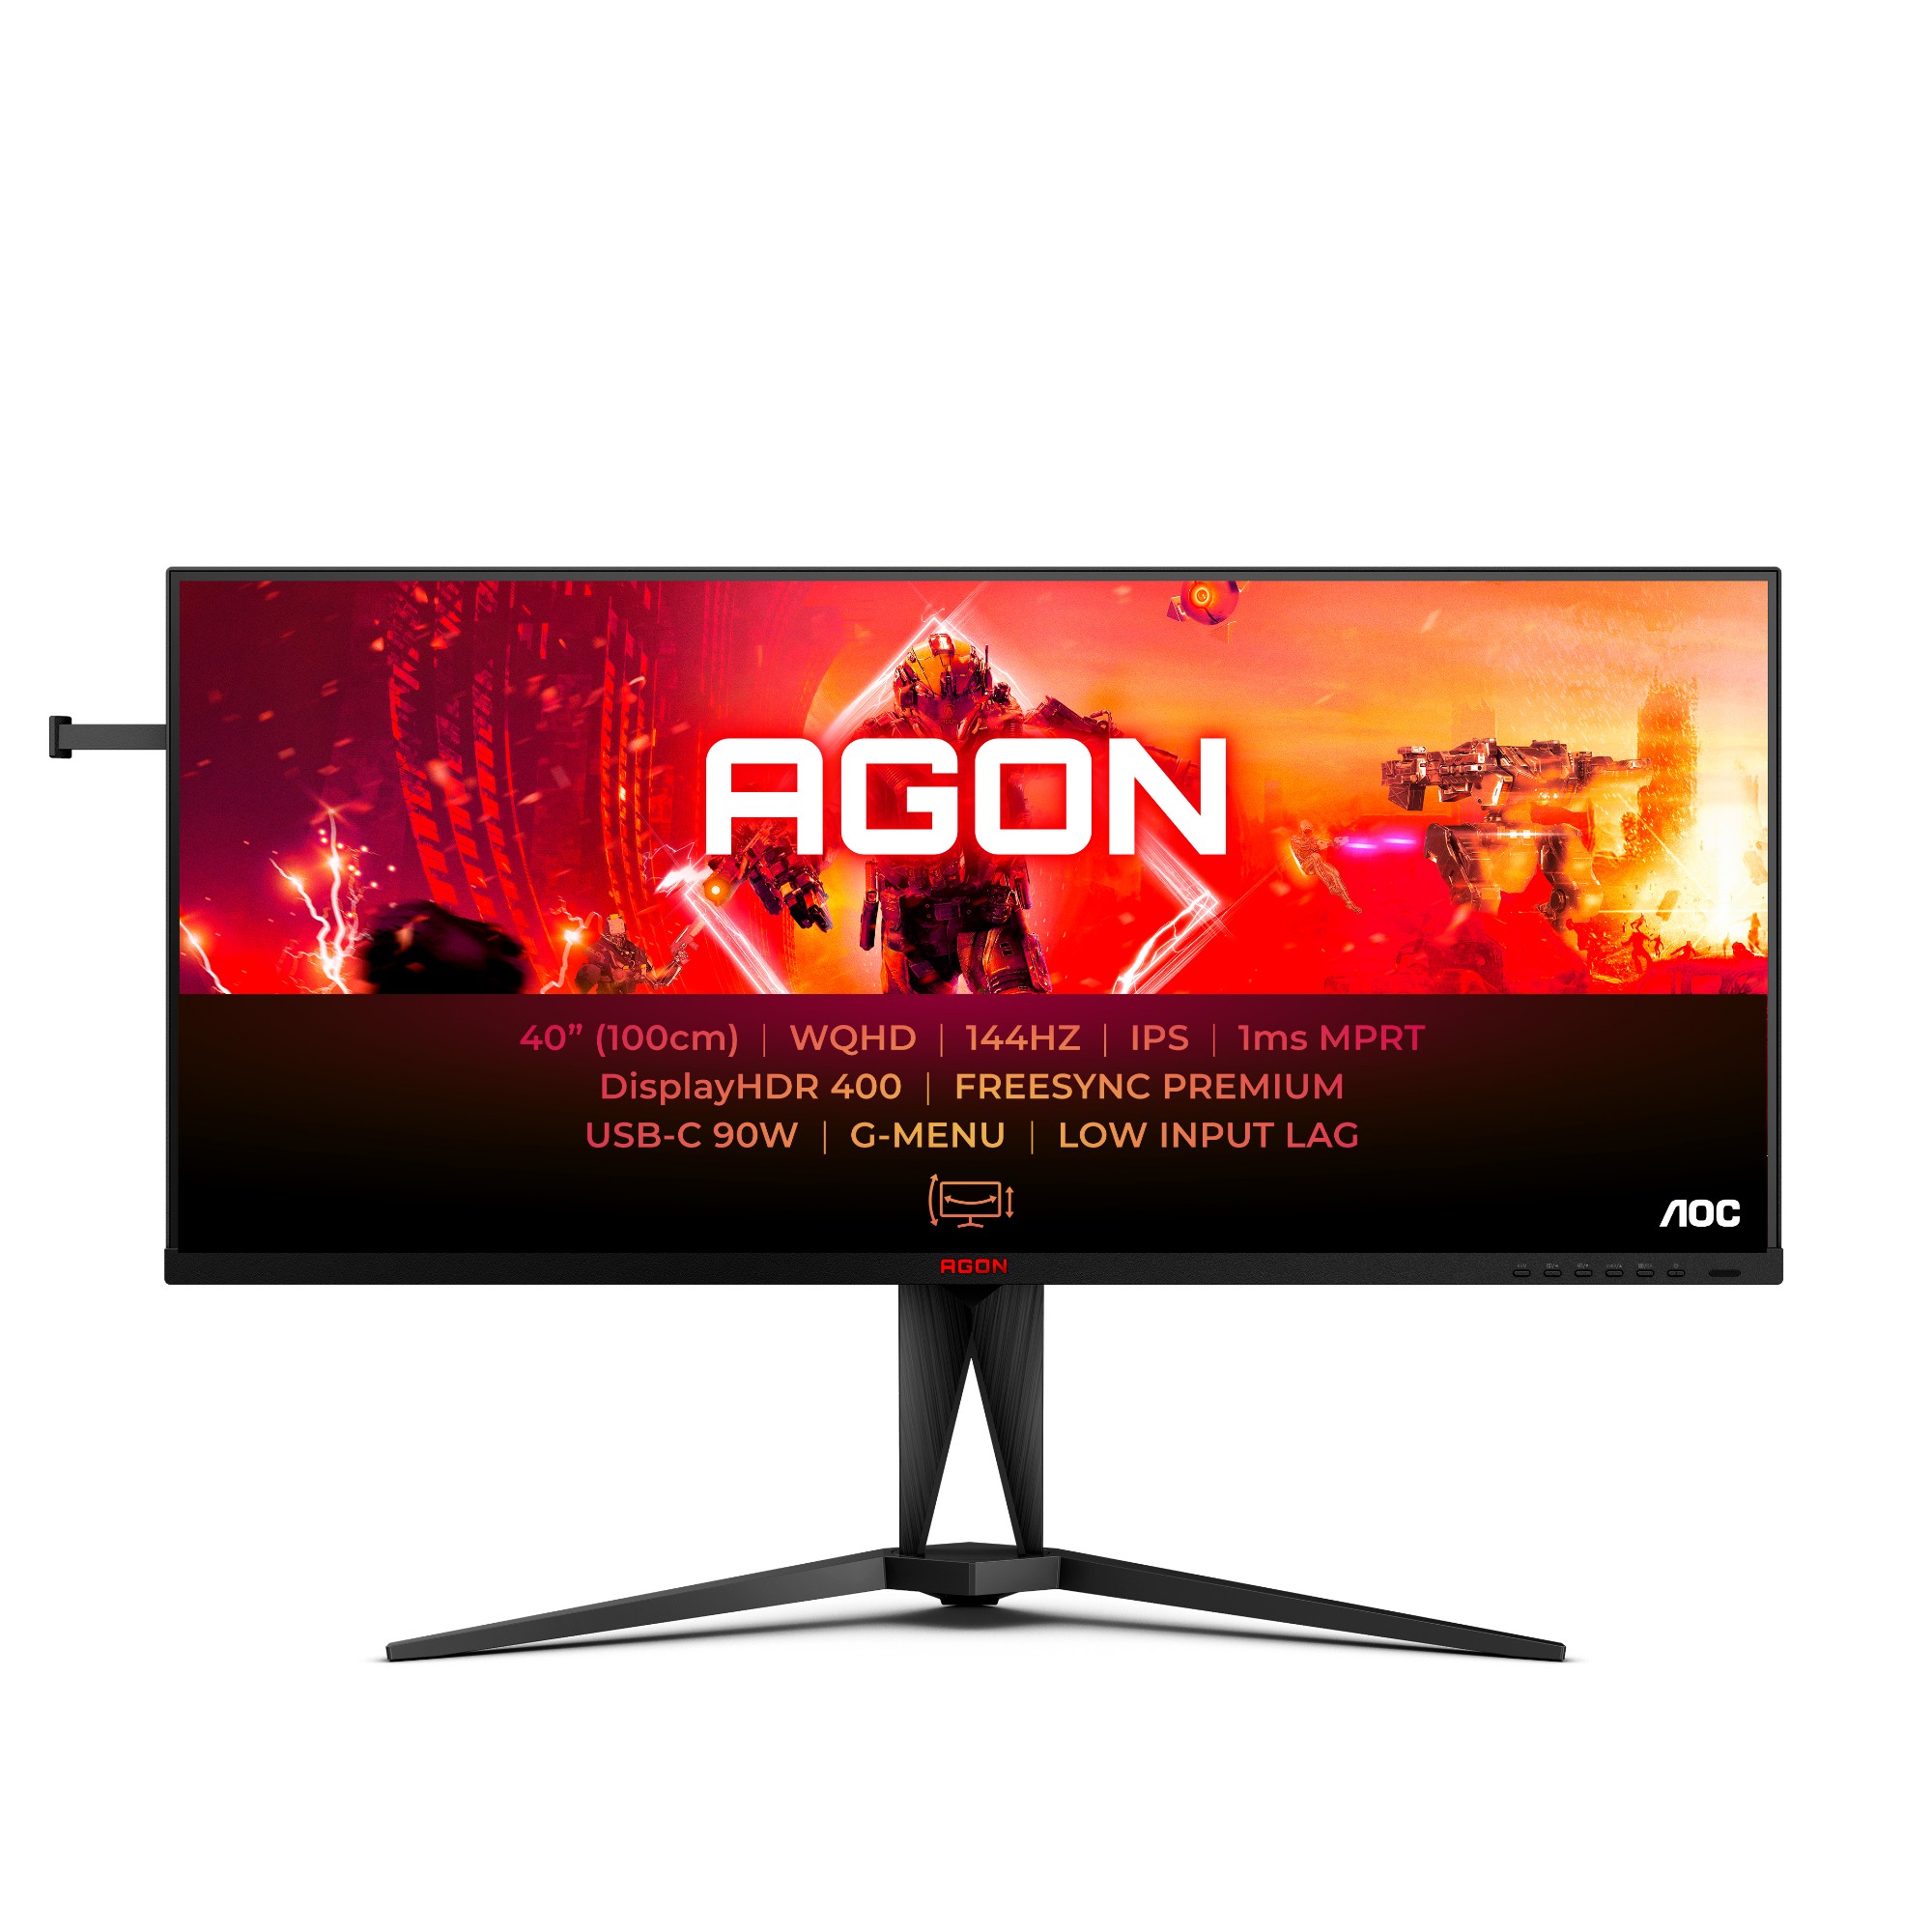 Screen size (inch) 40, Panel resolution 3440x1440, Refresh rate 144 Hz, Response time MPRT 1 ms, Panel type IPS, USB-C connectivity USB-C 3.2 x 1 (DP alt mode, upstream, power delivery up to 90 W), HDMI HDMI 2.0 x 2, Display Port DisplayPort 1.4 x 1, Sync